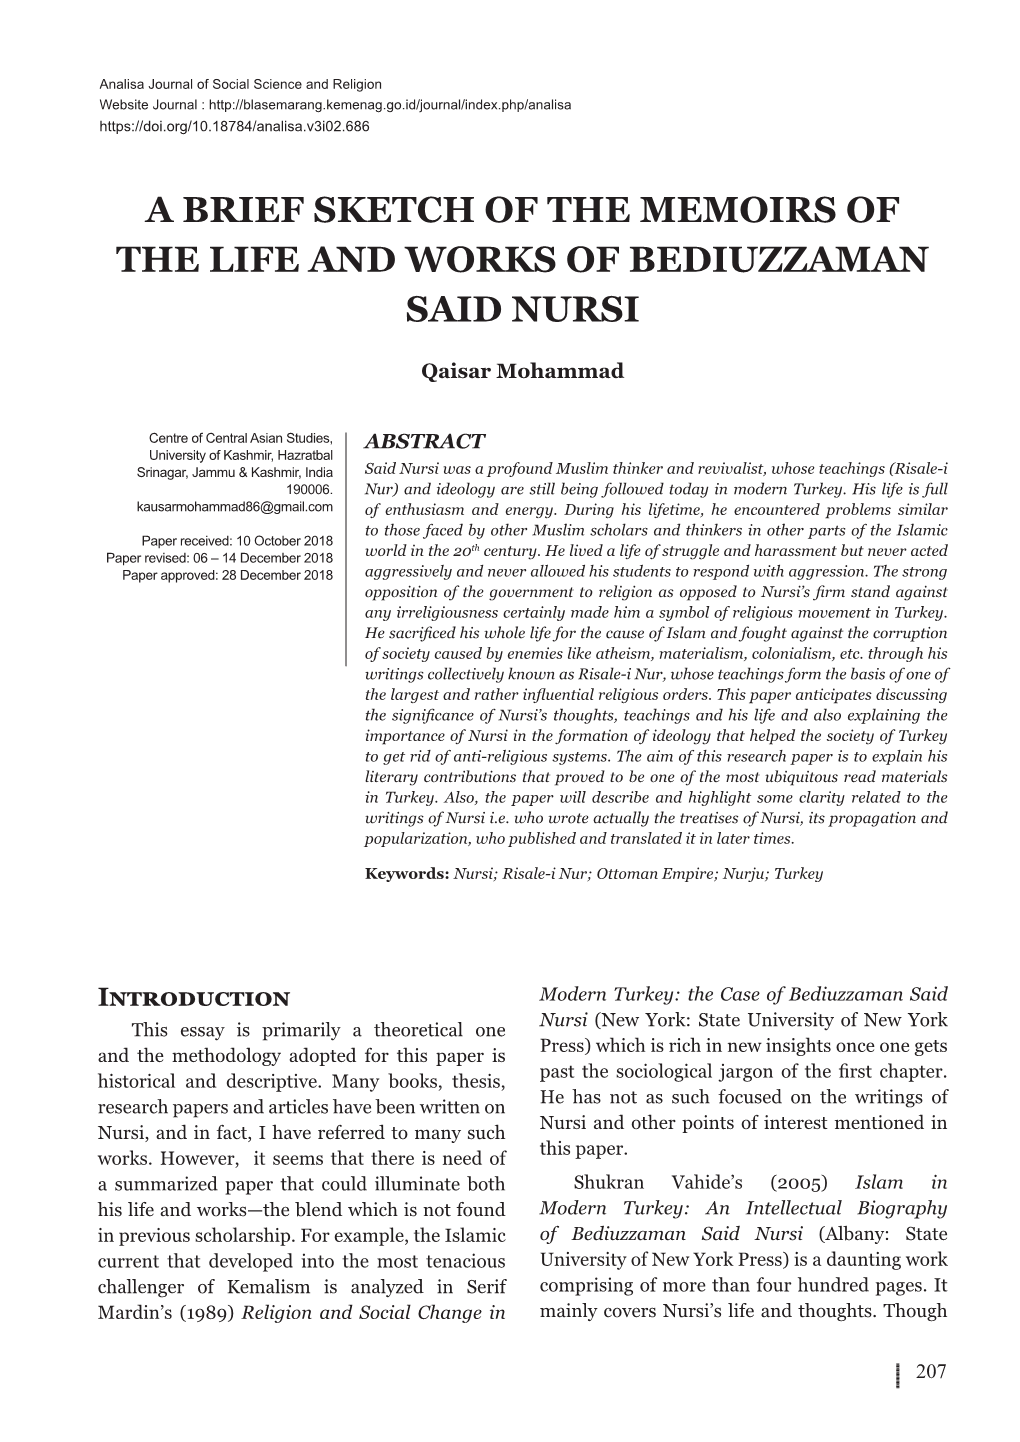 A Brief Sketch of the Memoirs of the Life and Works of Bediuzzaman Said Nursi